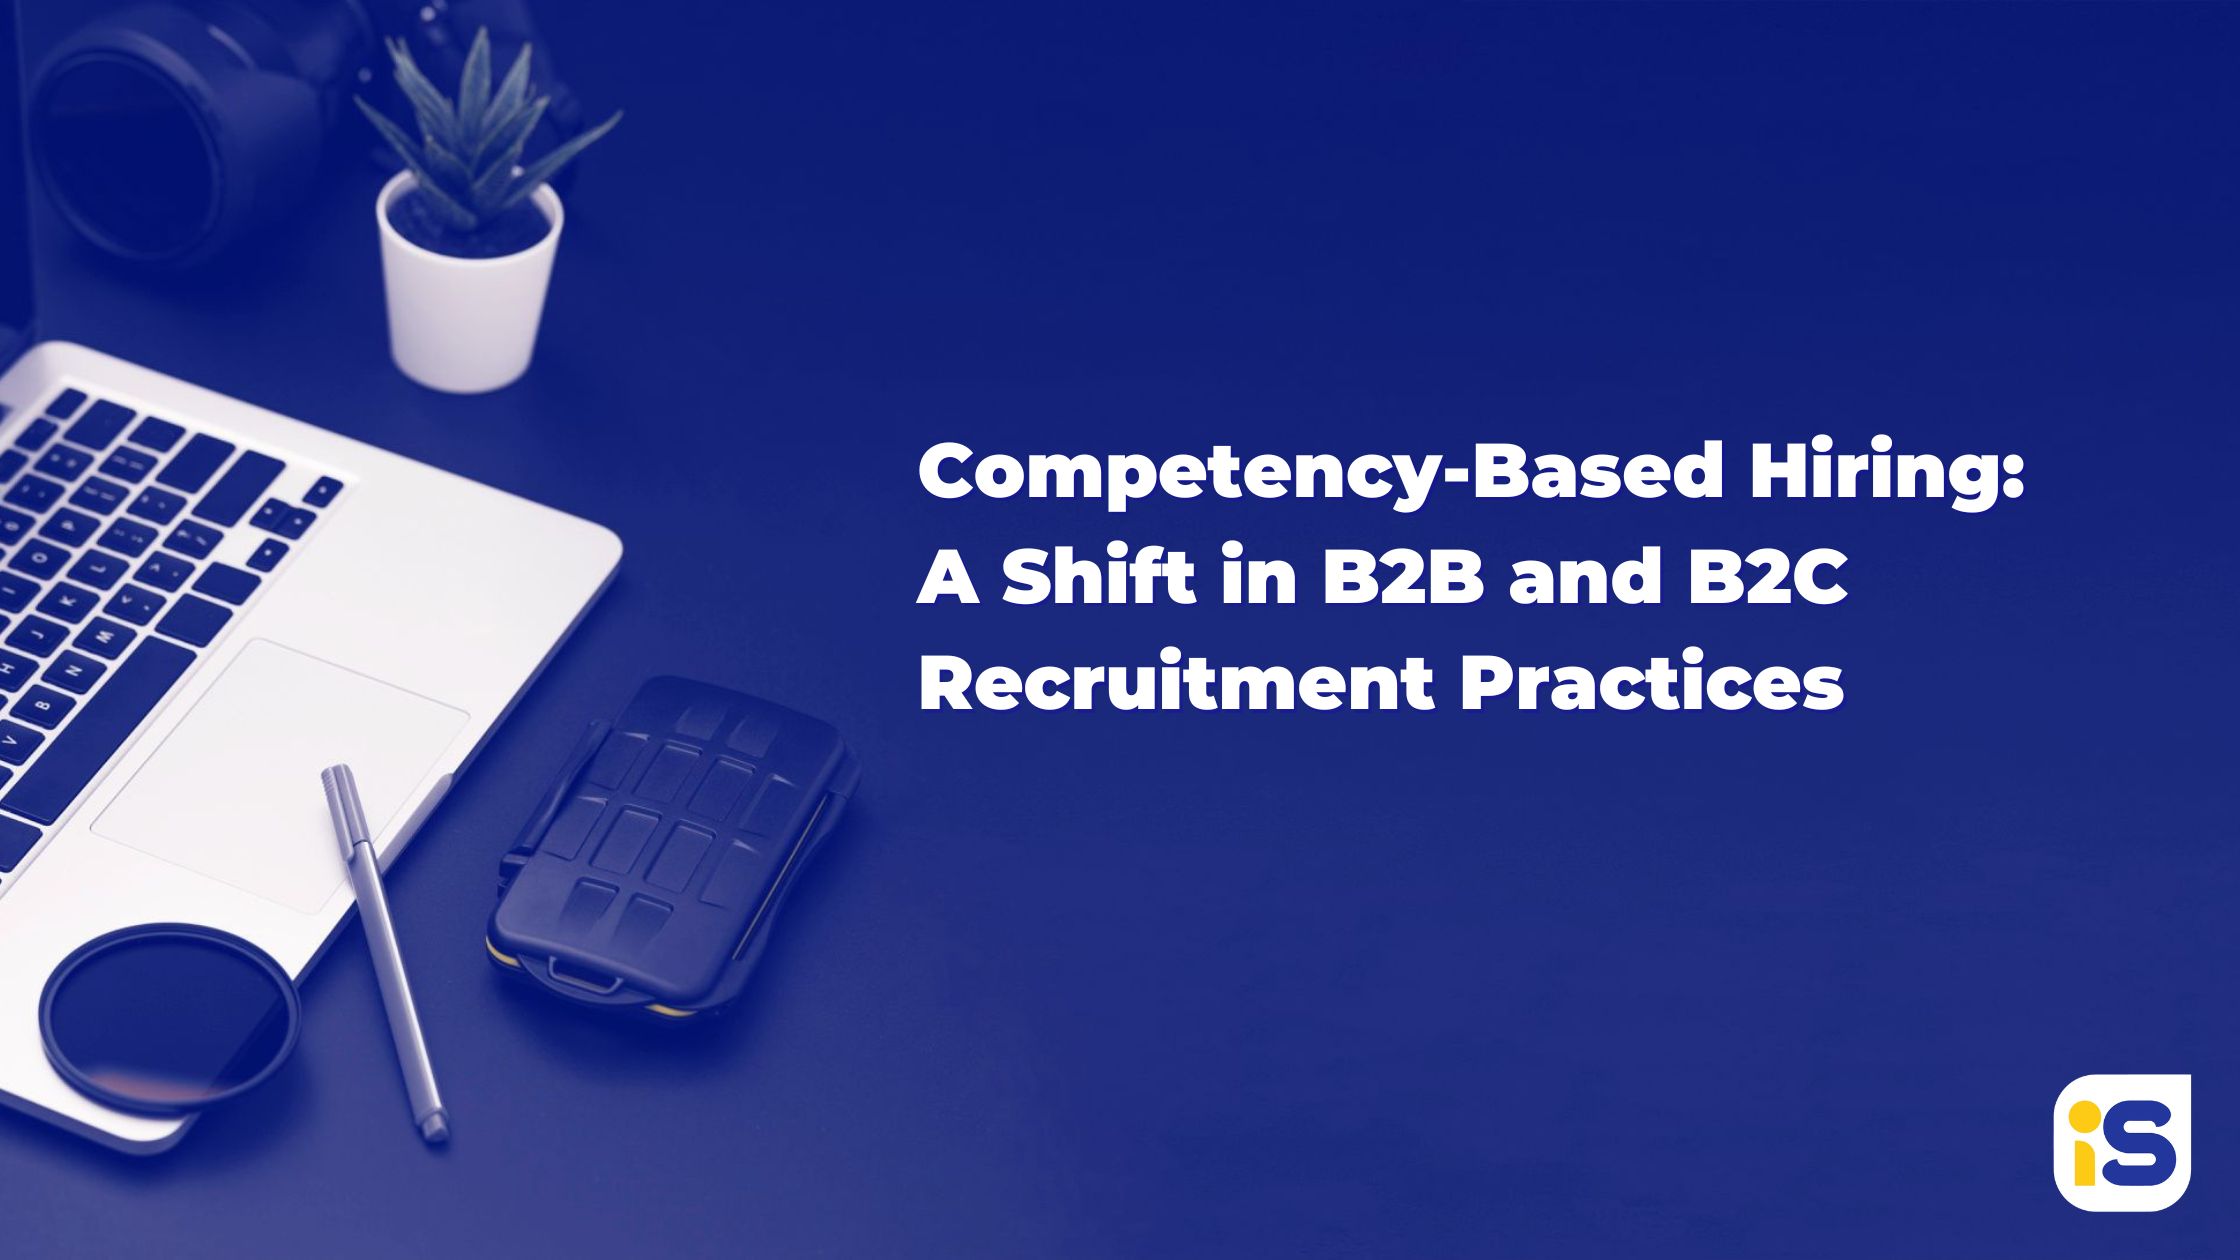 Competency-Based Hiring: A Shift in B2B and B2C Recruitment Practices